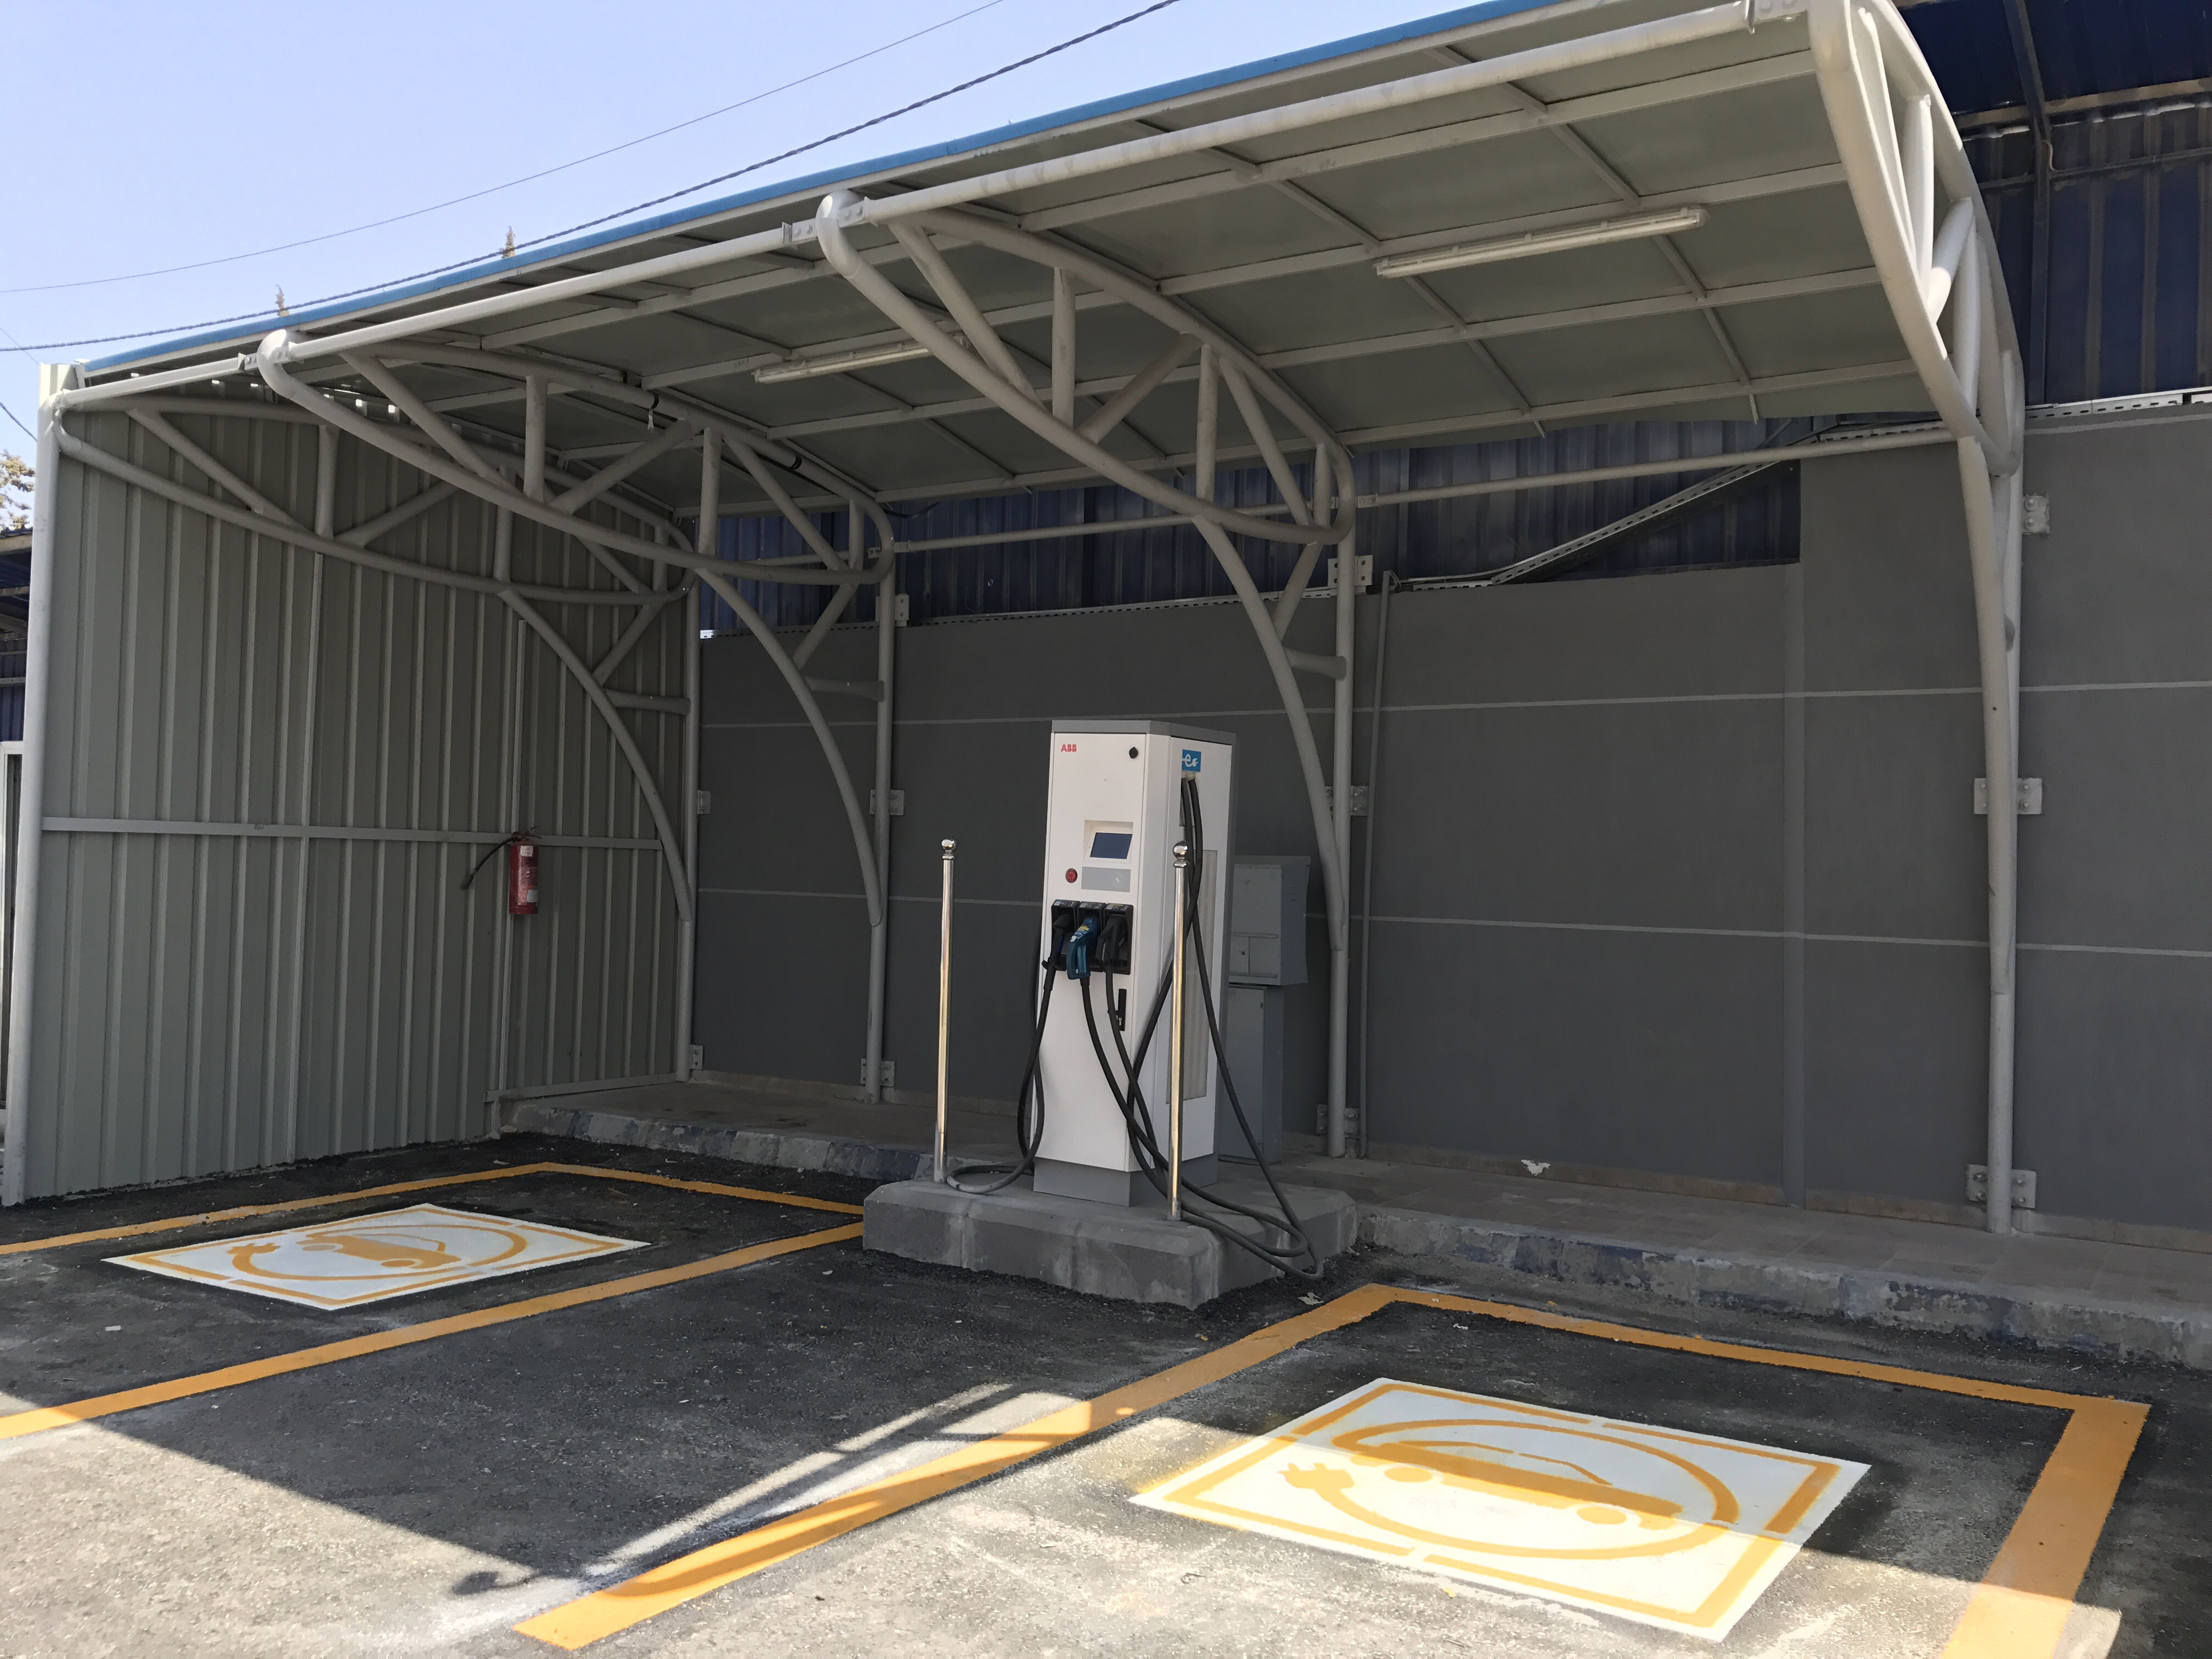 Manaseer Oil & Gas installed a new fast electric vehicle cars charger for the public use